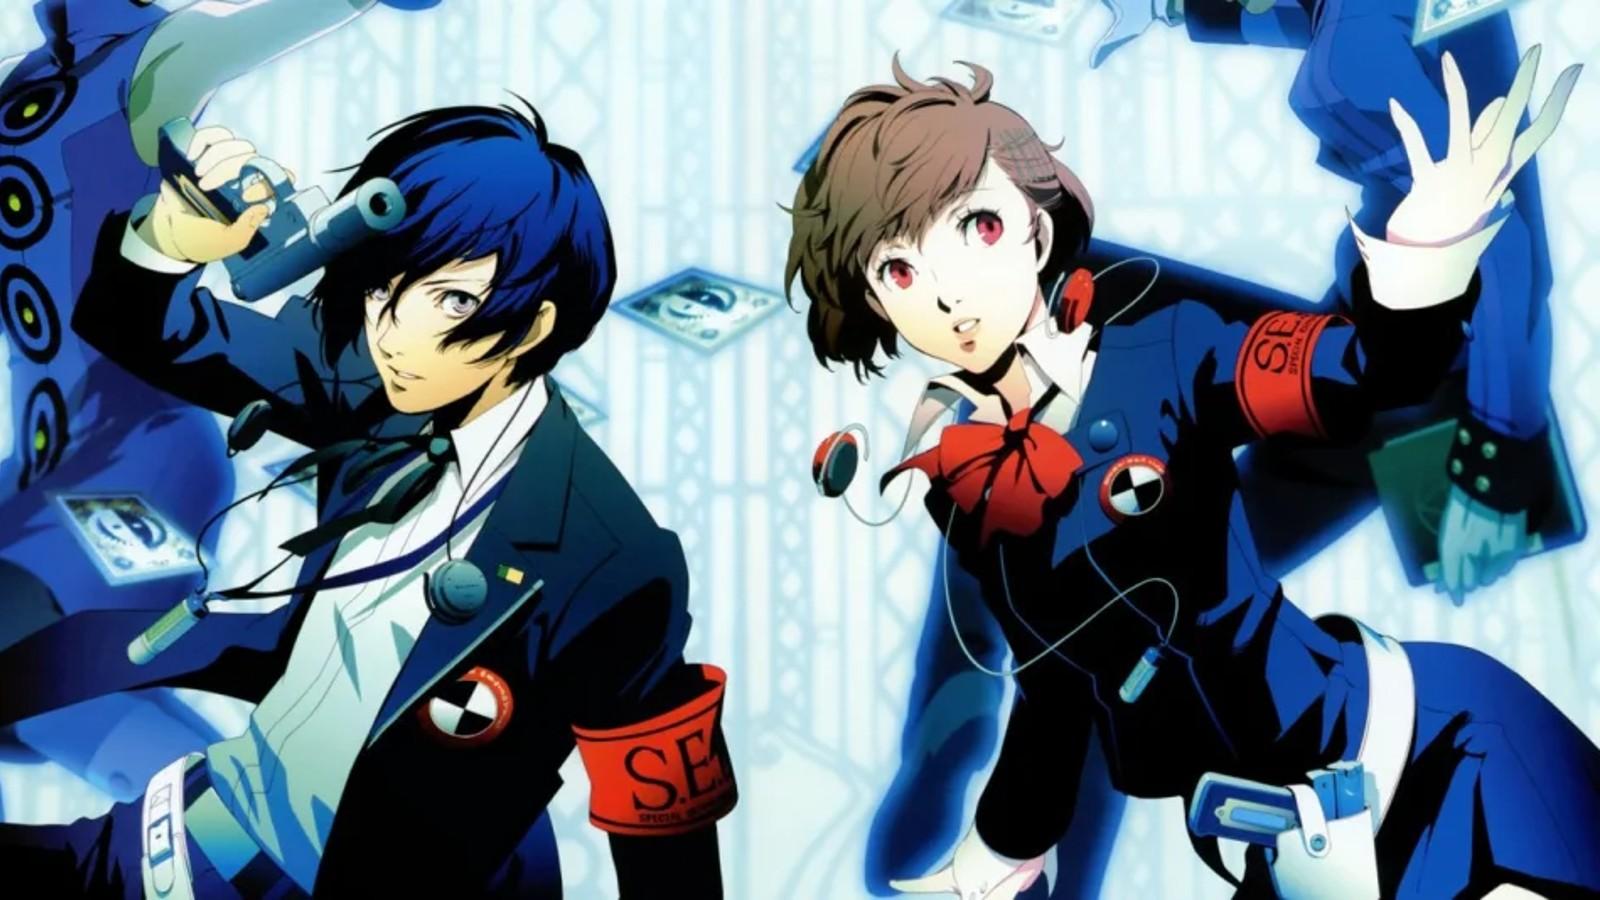 An official image of Persona 3 Portable artwork featuring the male and female protagonists.